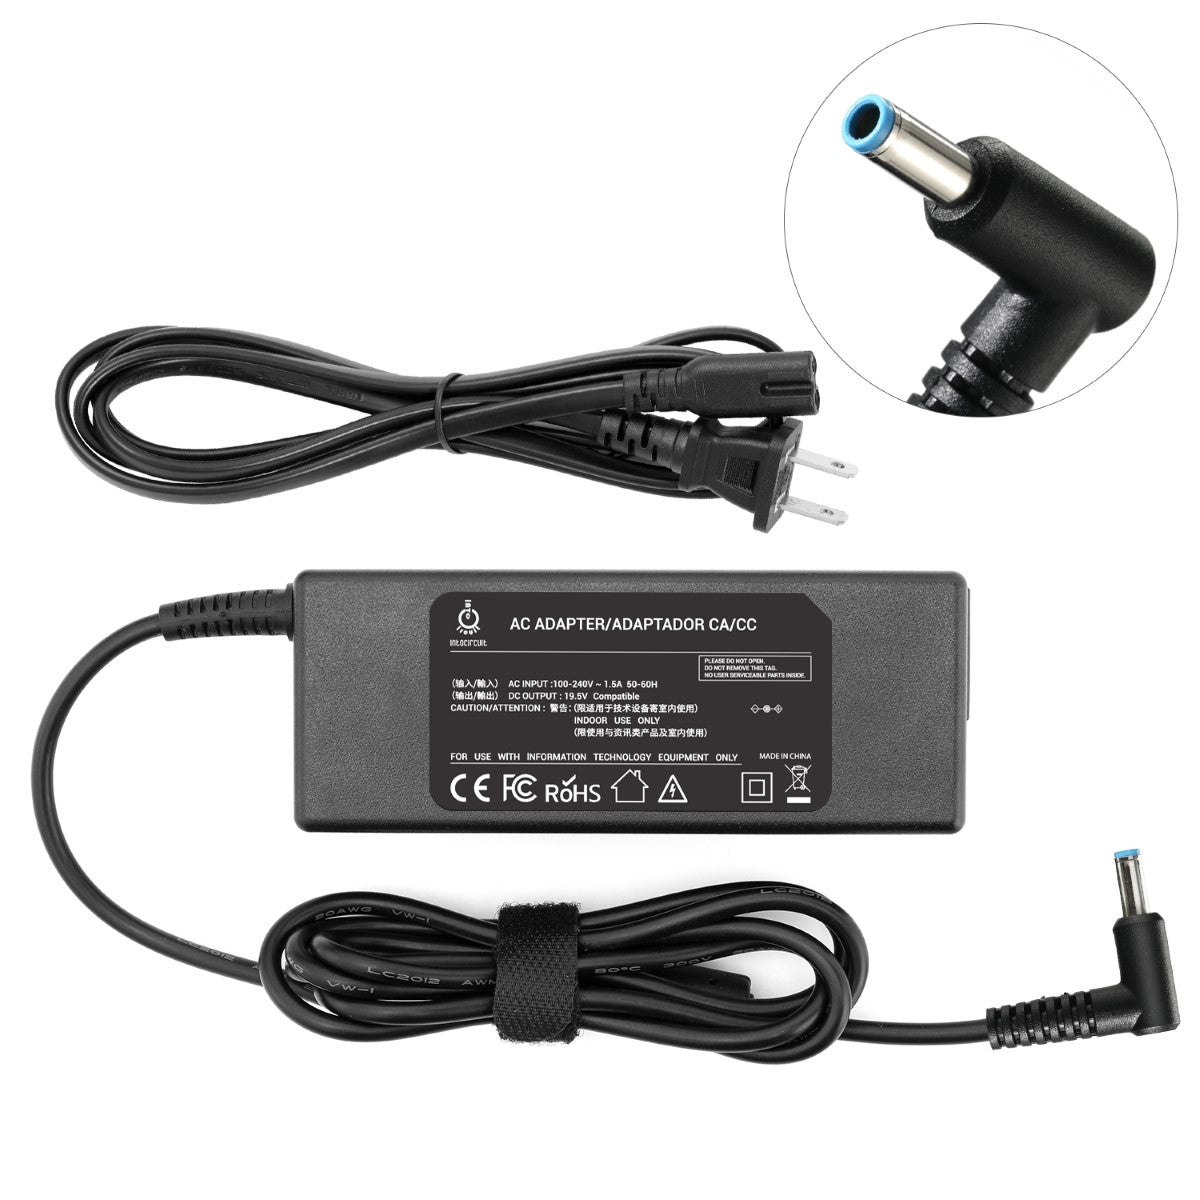 AC Adapter Charger for HP Pavilion 15-bk157cl Touch X360 Notebook